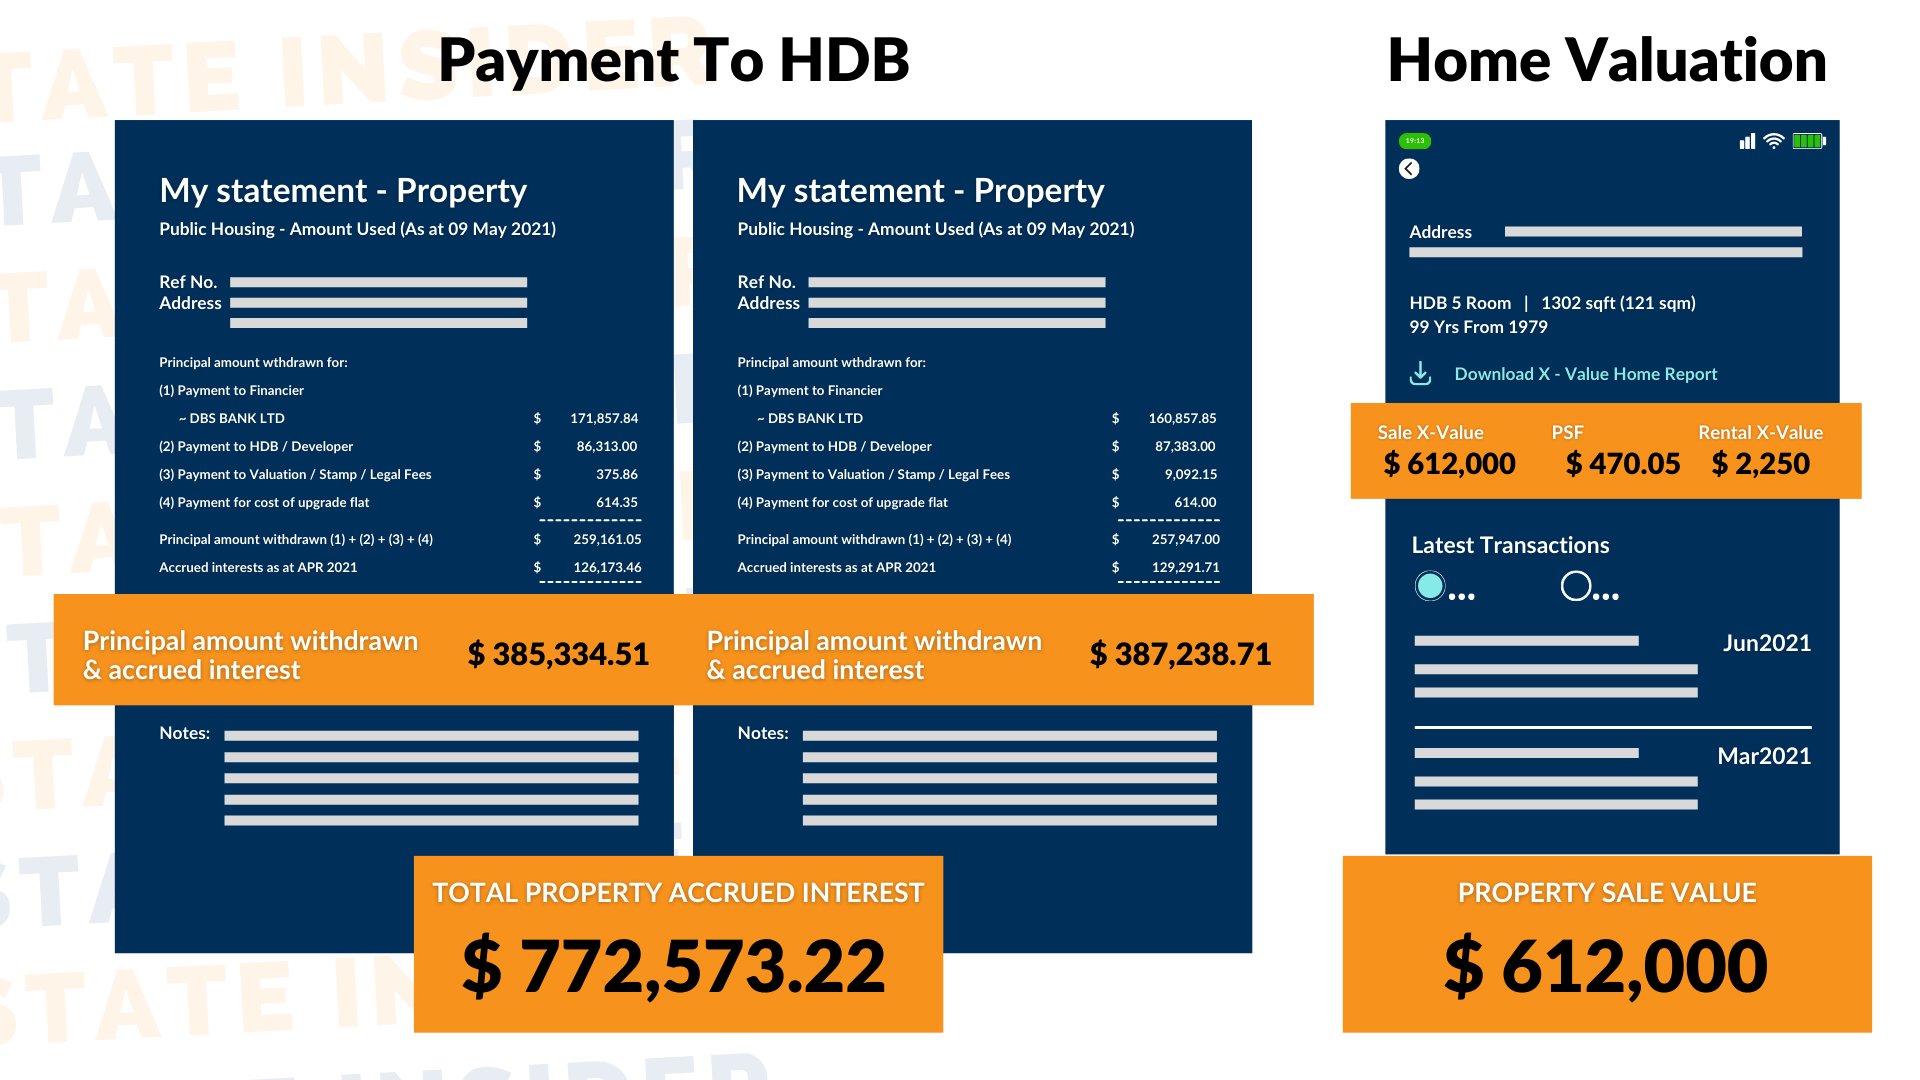 Payment to HDB & Home Valuation